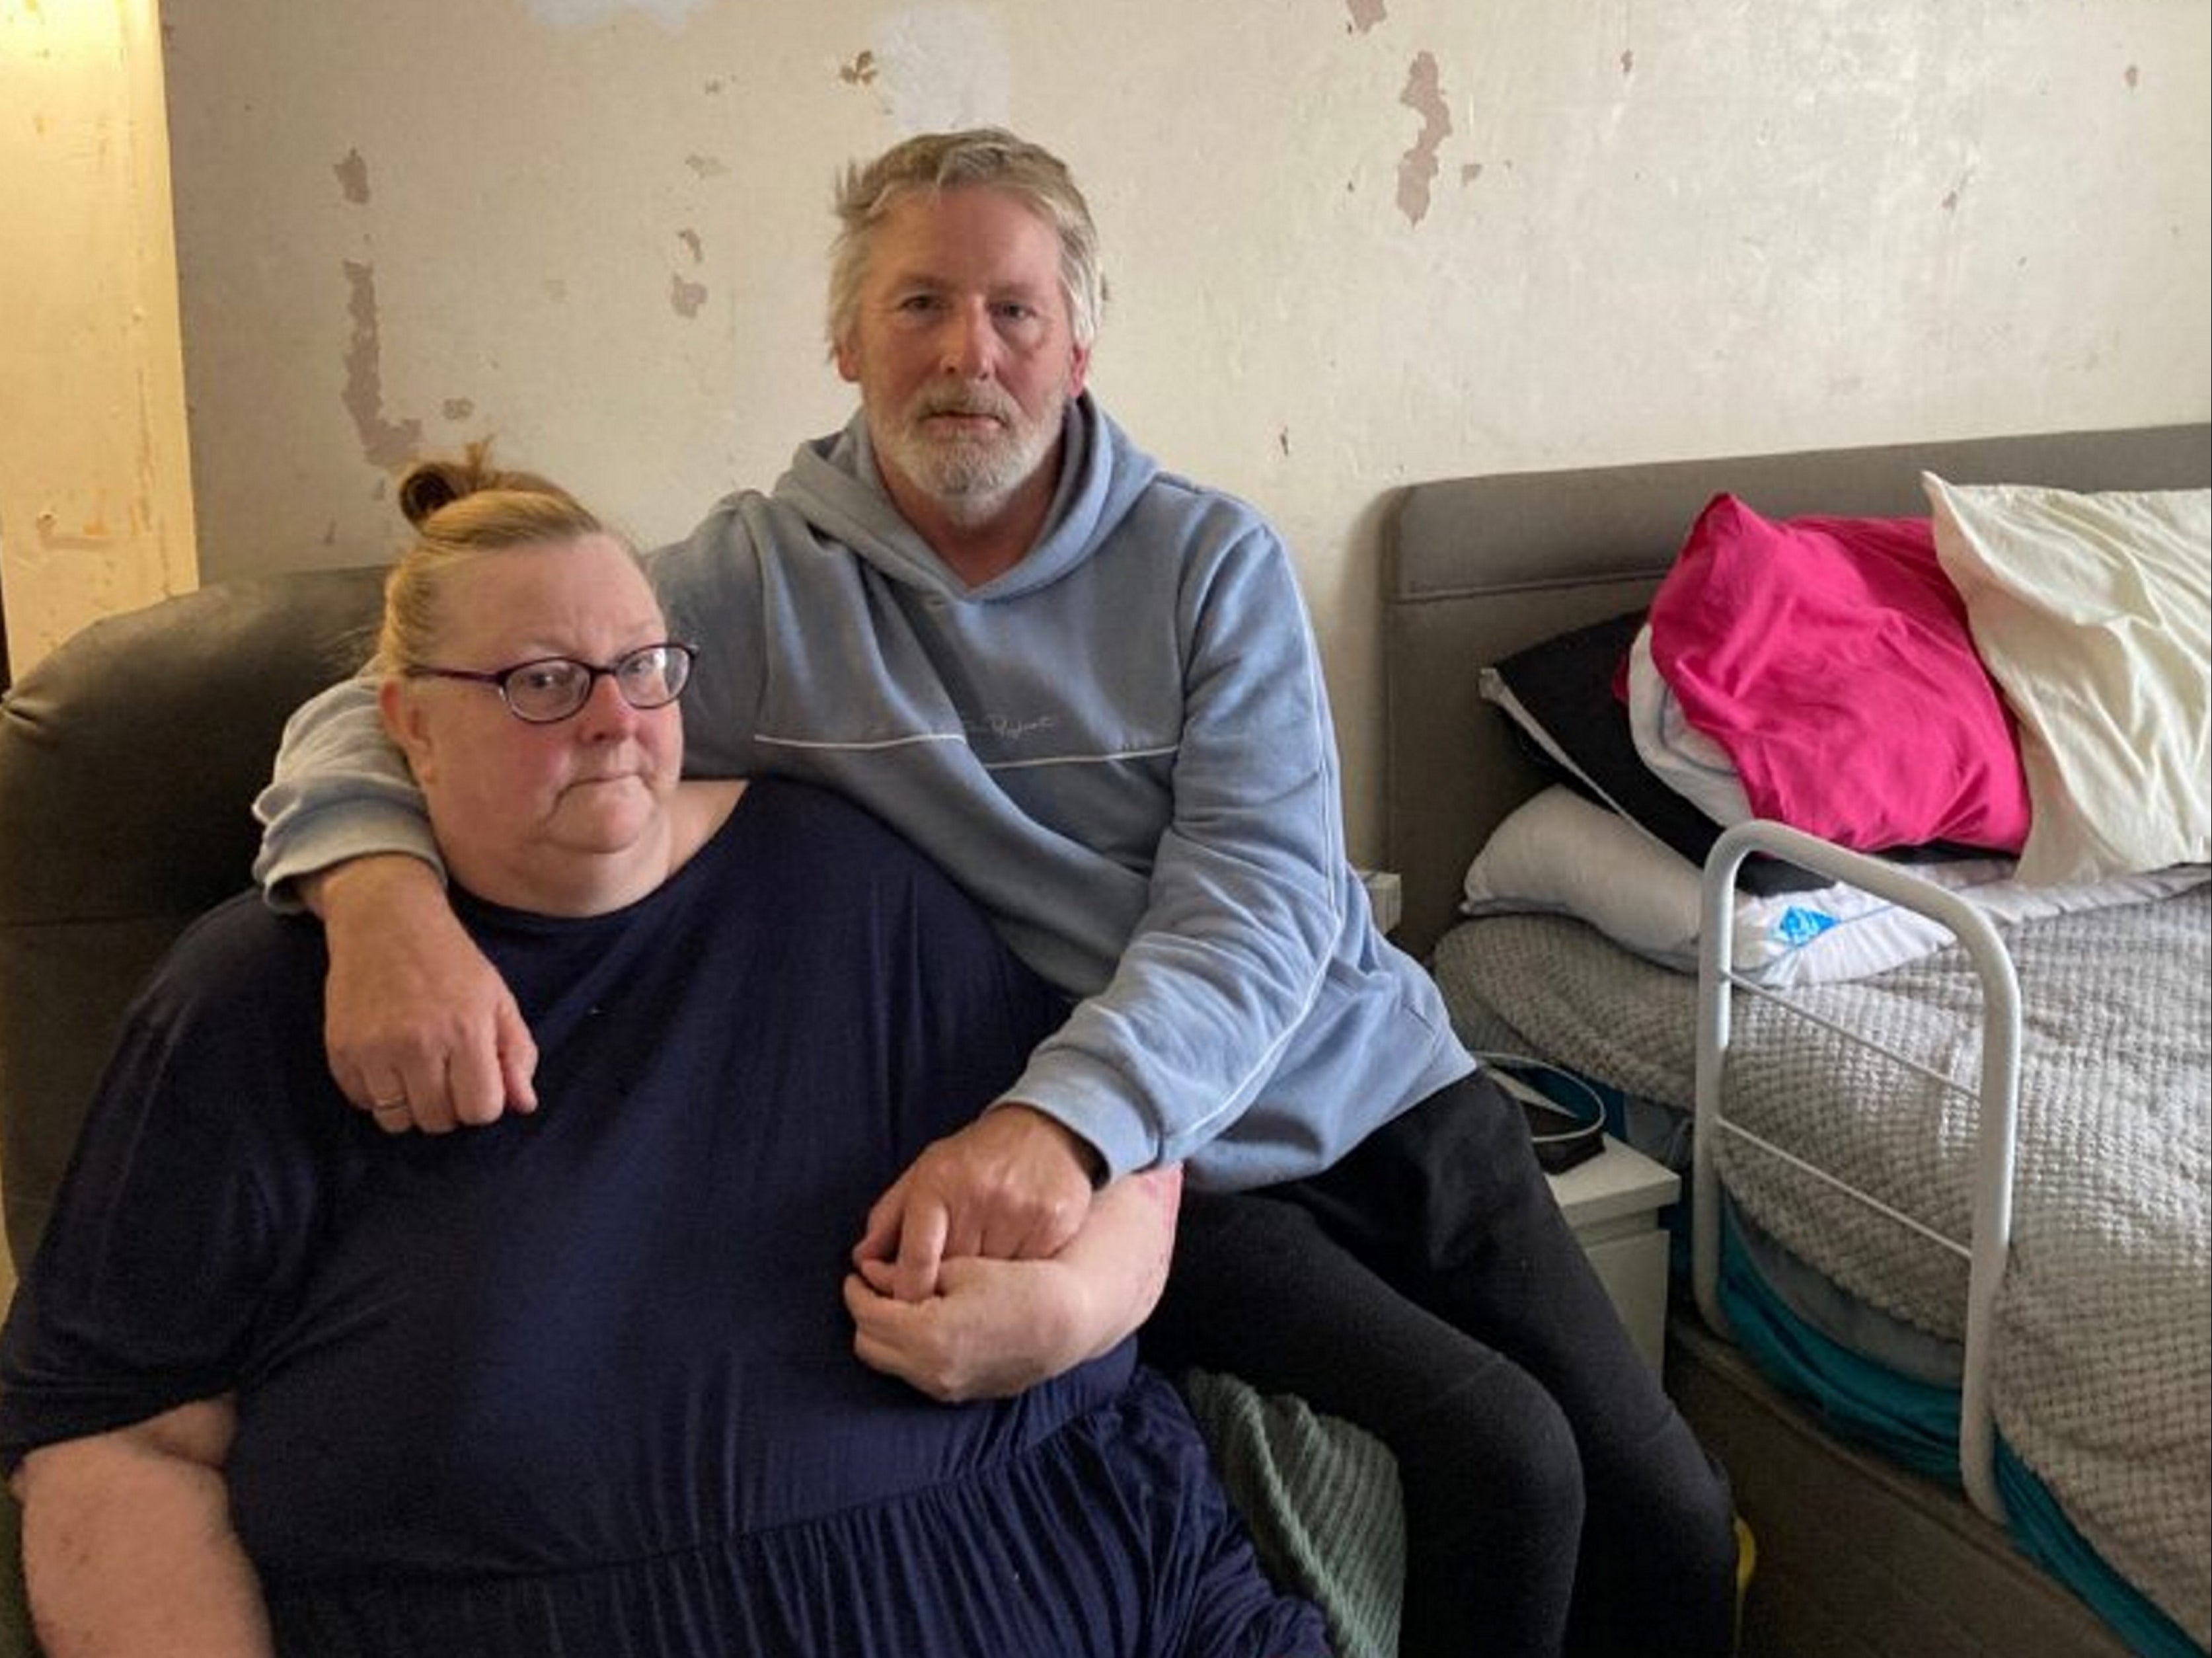 Sharon Brookes and her husband, Alan, say their council house has been infested with bed bugs since last summer